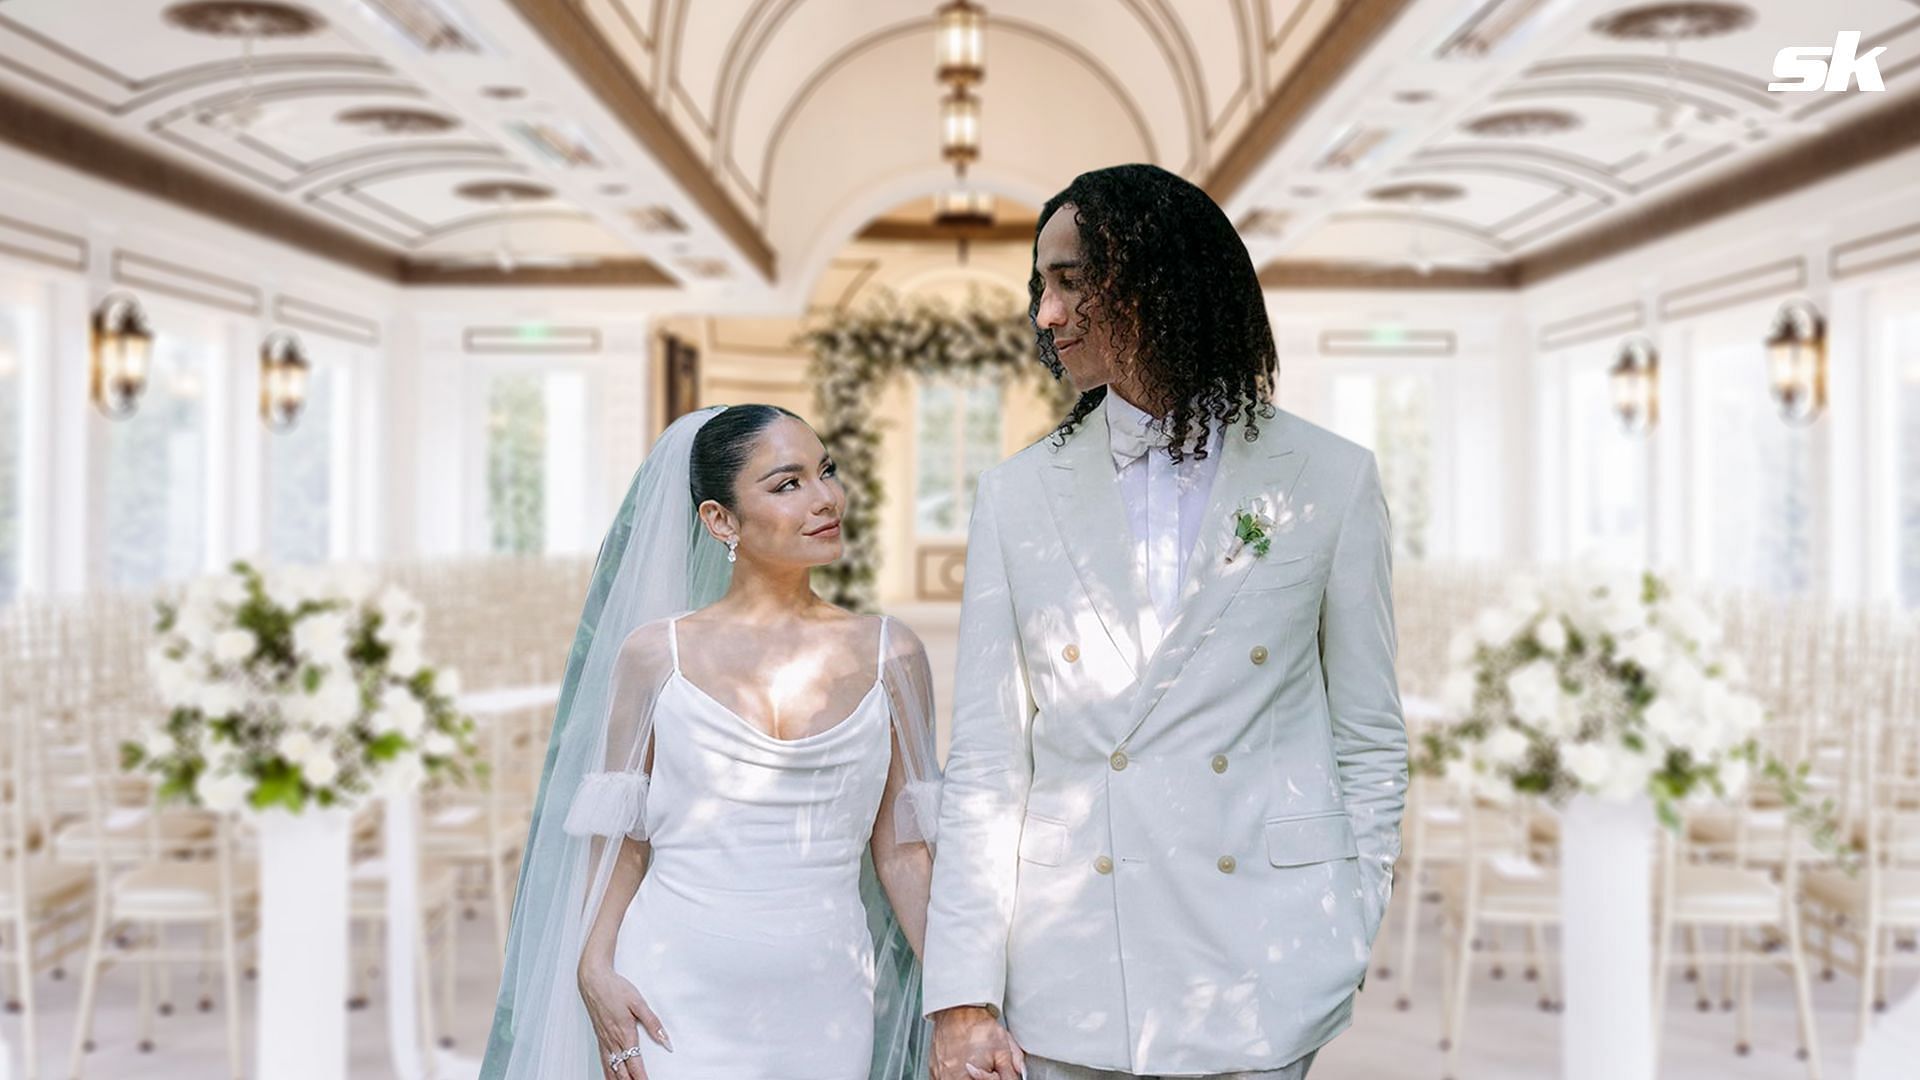 Cole Tucker goes suave in a $2,395 Canali suit while tying the knot with Vanessa Hudgens